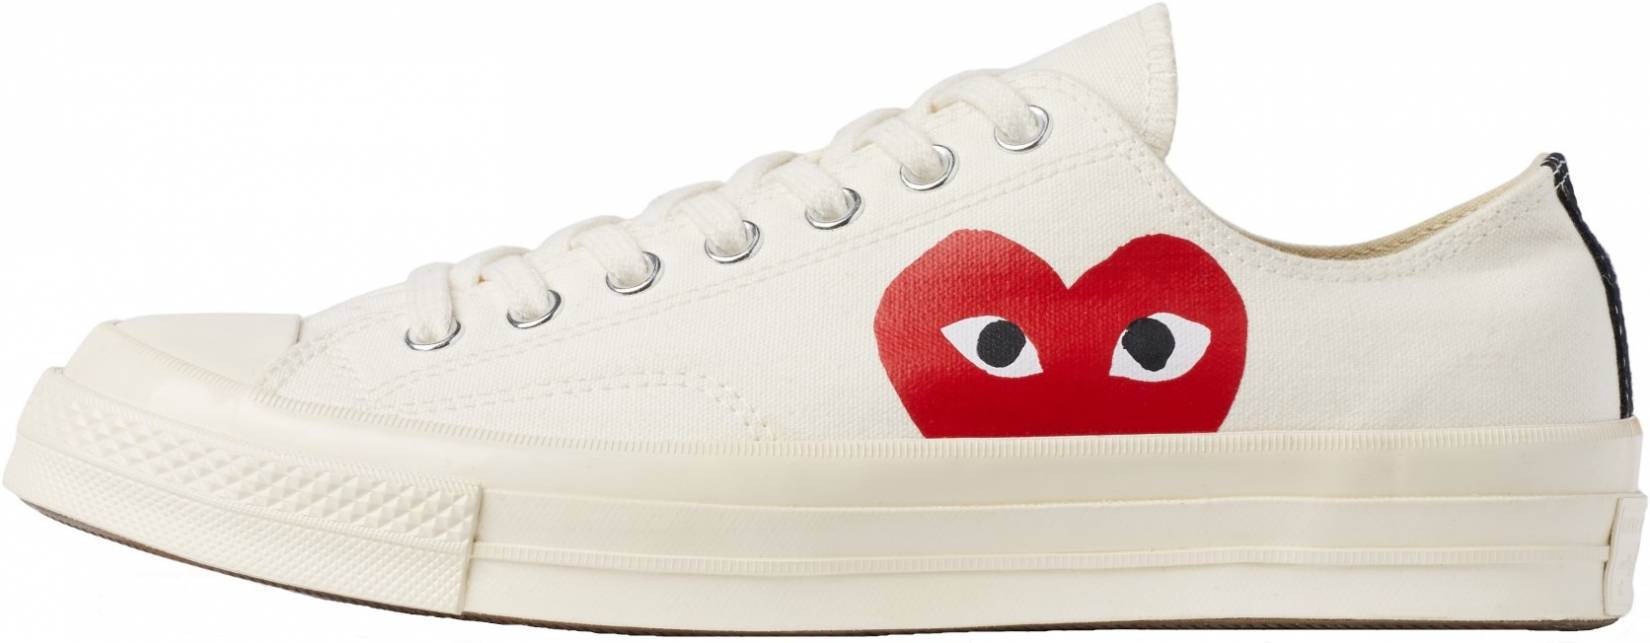 cdg converse womens size 5